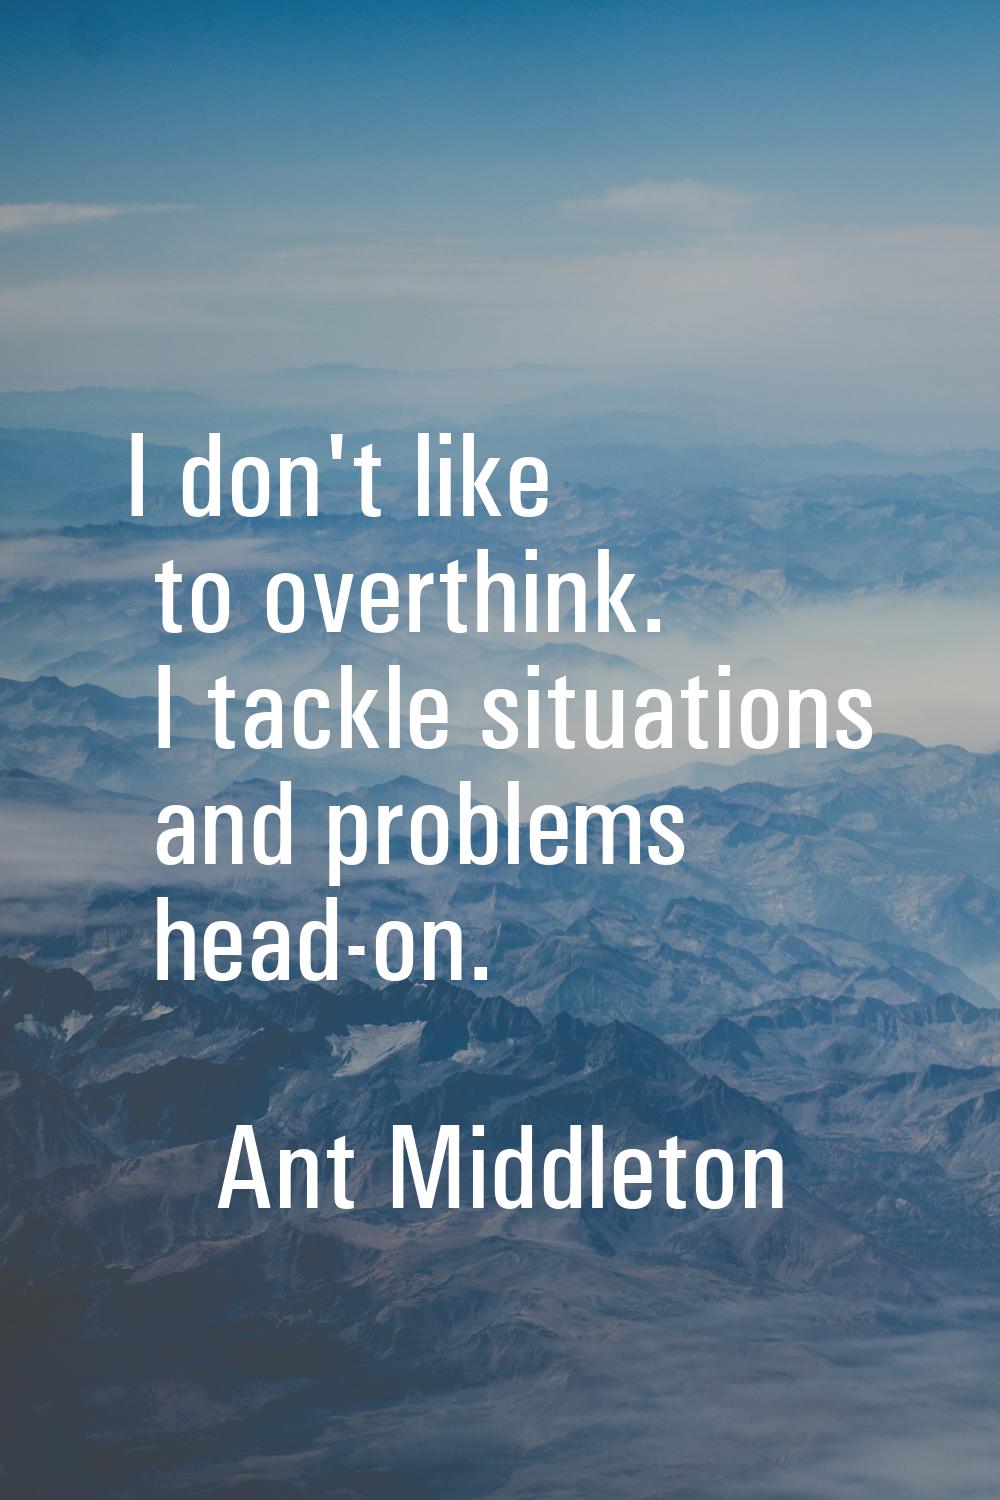 I don't like to overthink. I tackle situations and problems head-on.